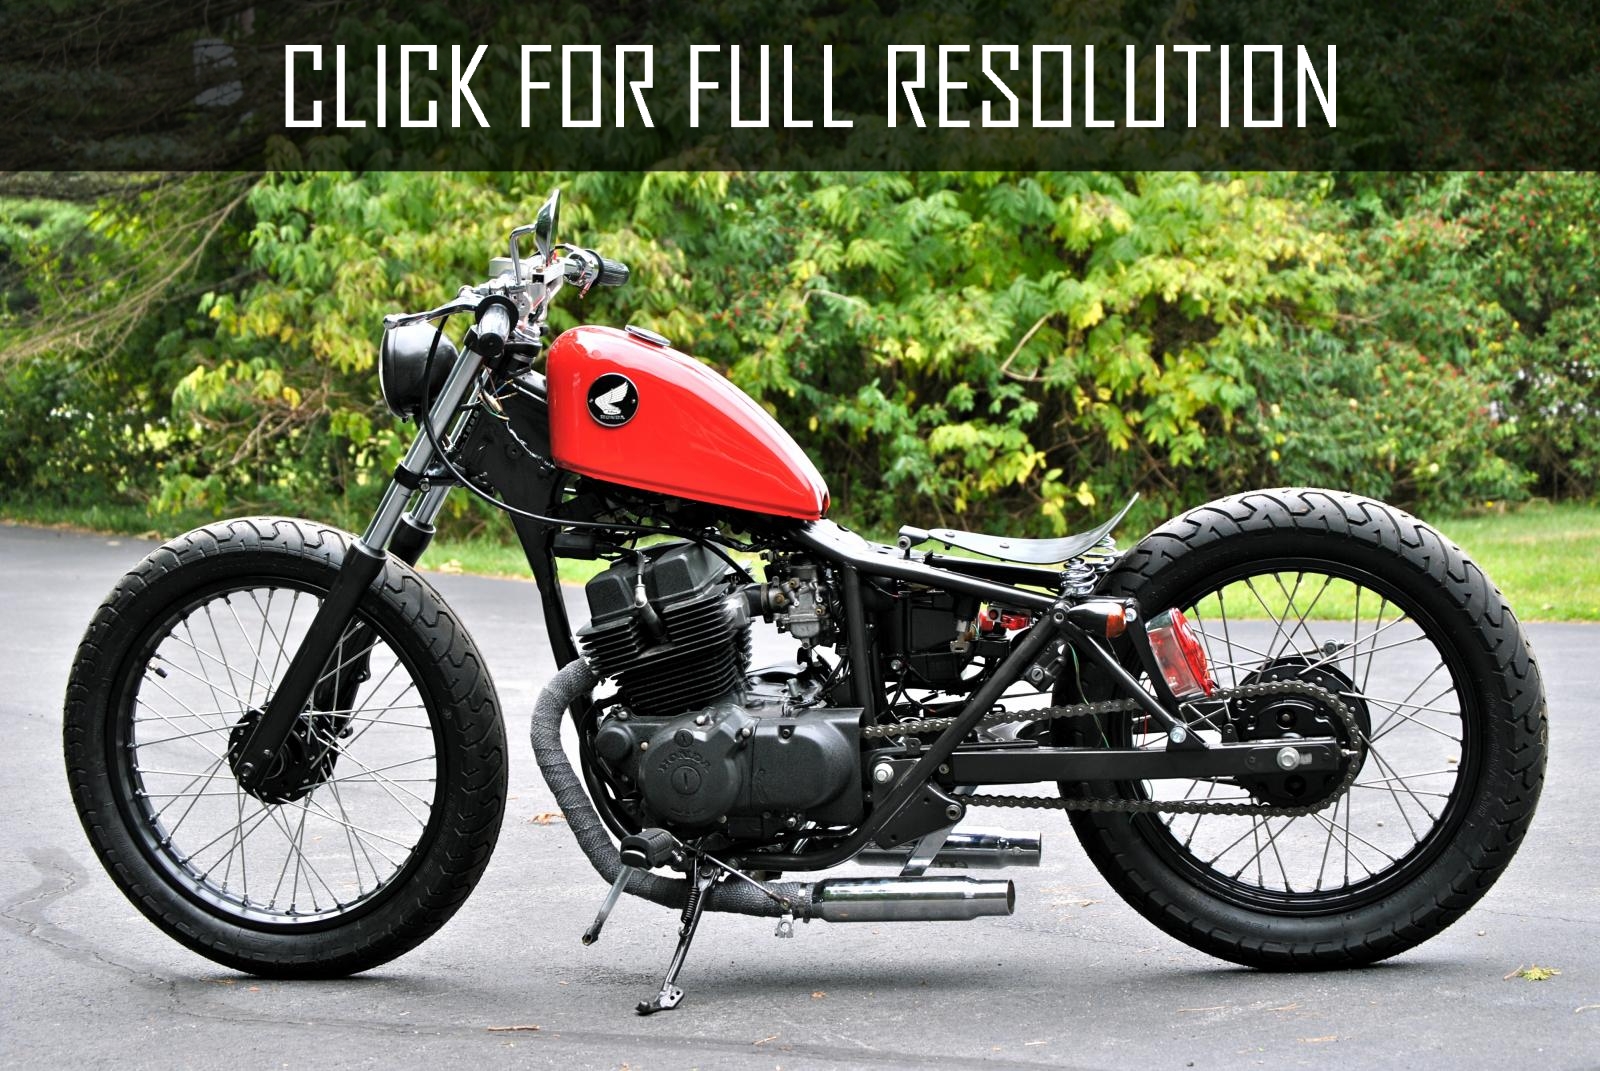 1987 Honda Rebel 250 best image gallery #12/19 - share and download